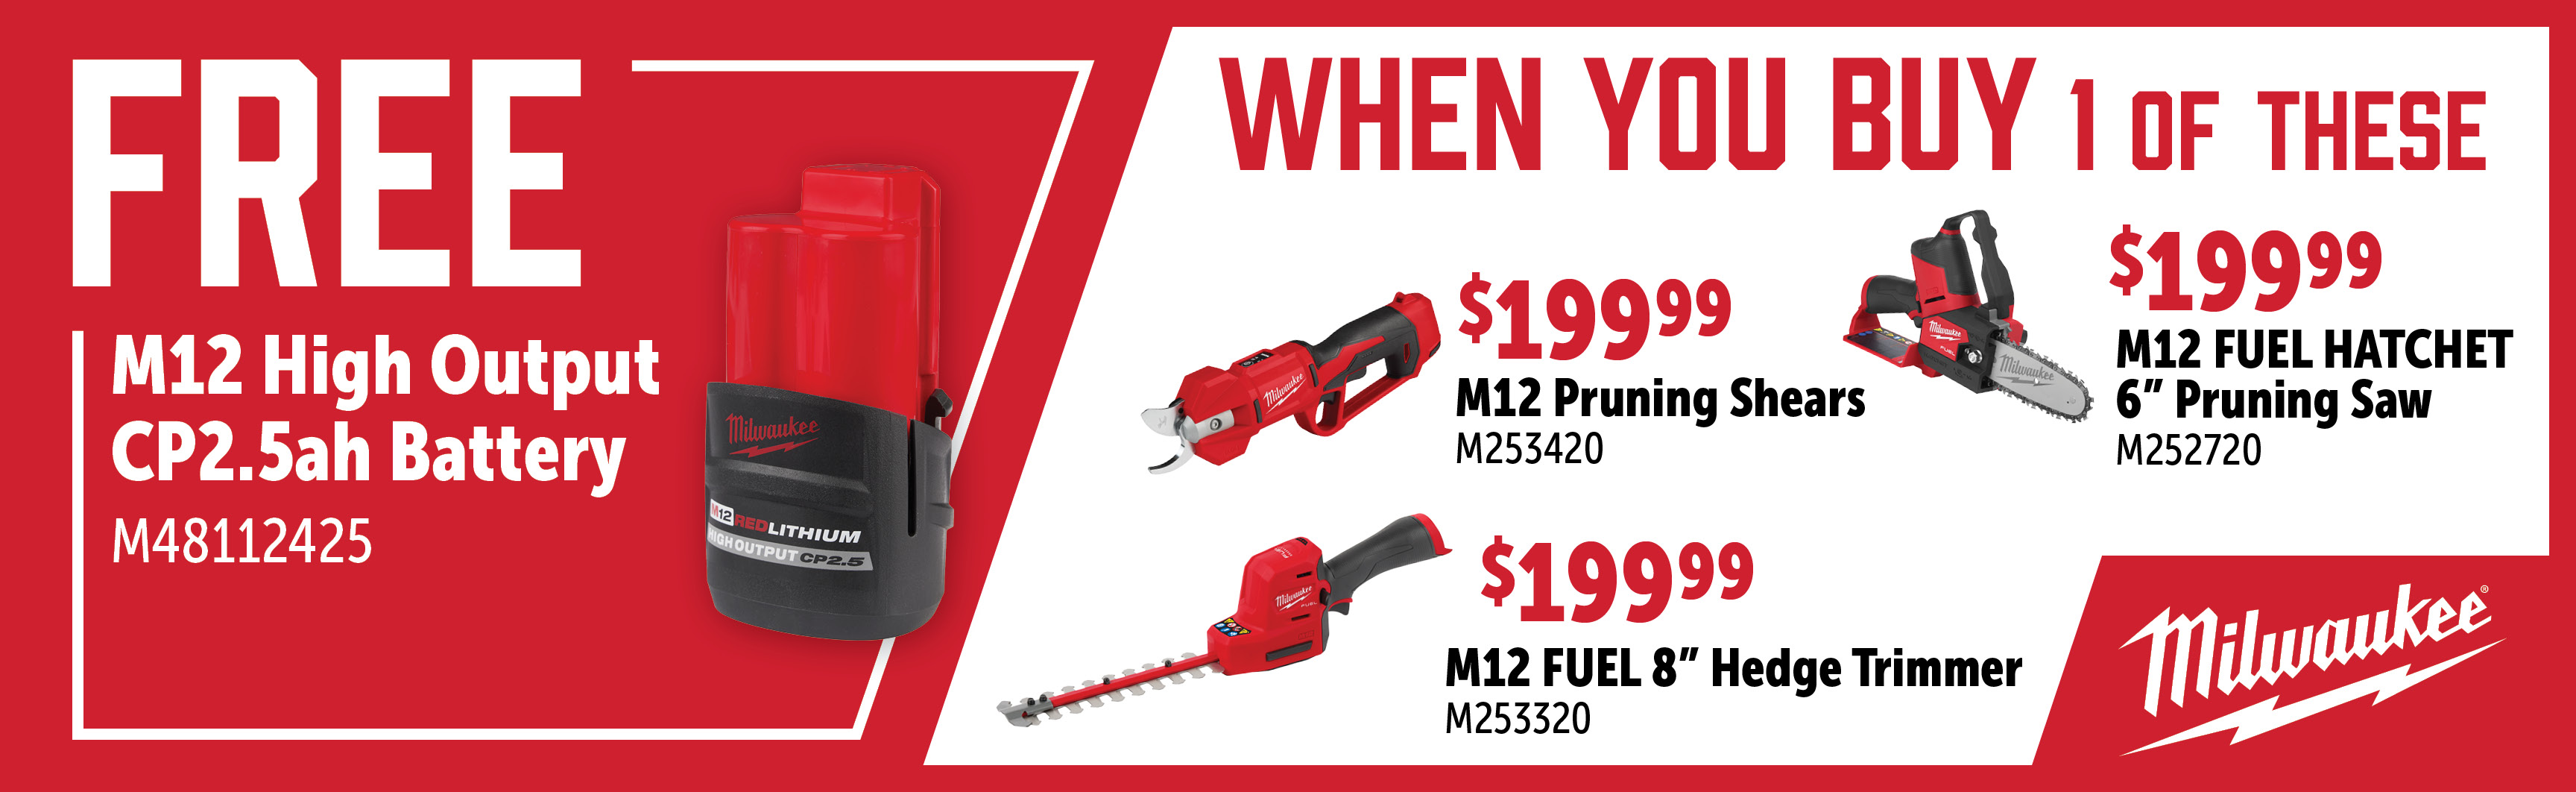 Milwaukee Mar-Jul: Buy an M252720 or M253420 and Get a FREE M48112425